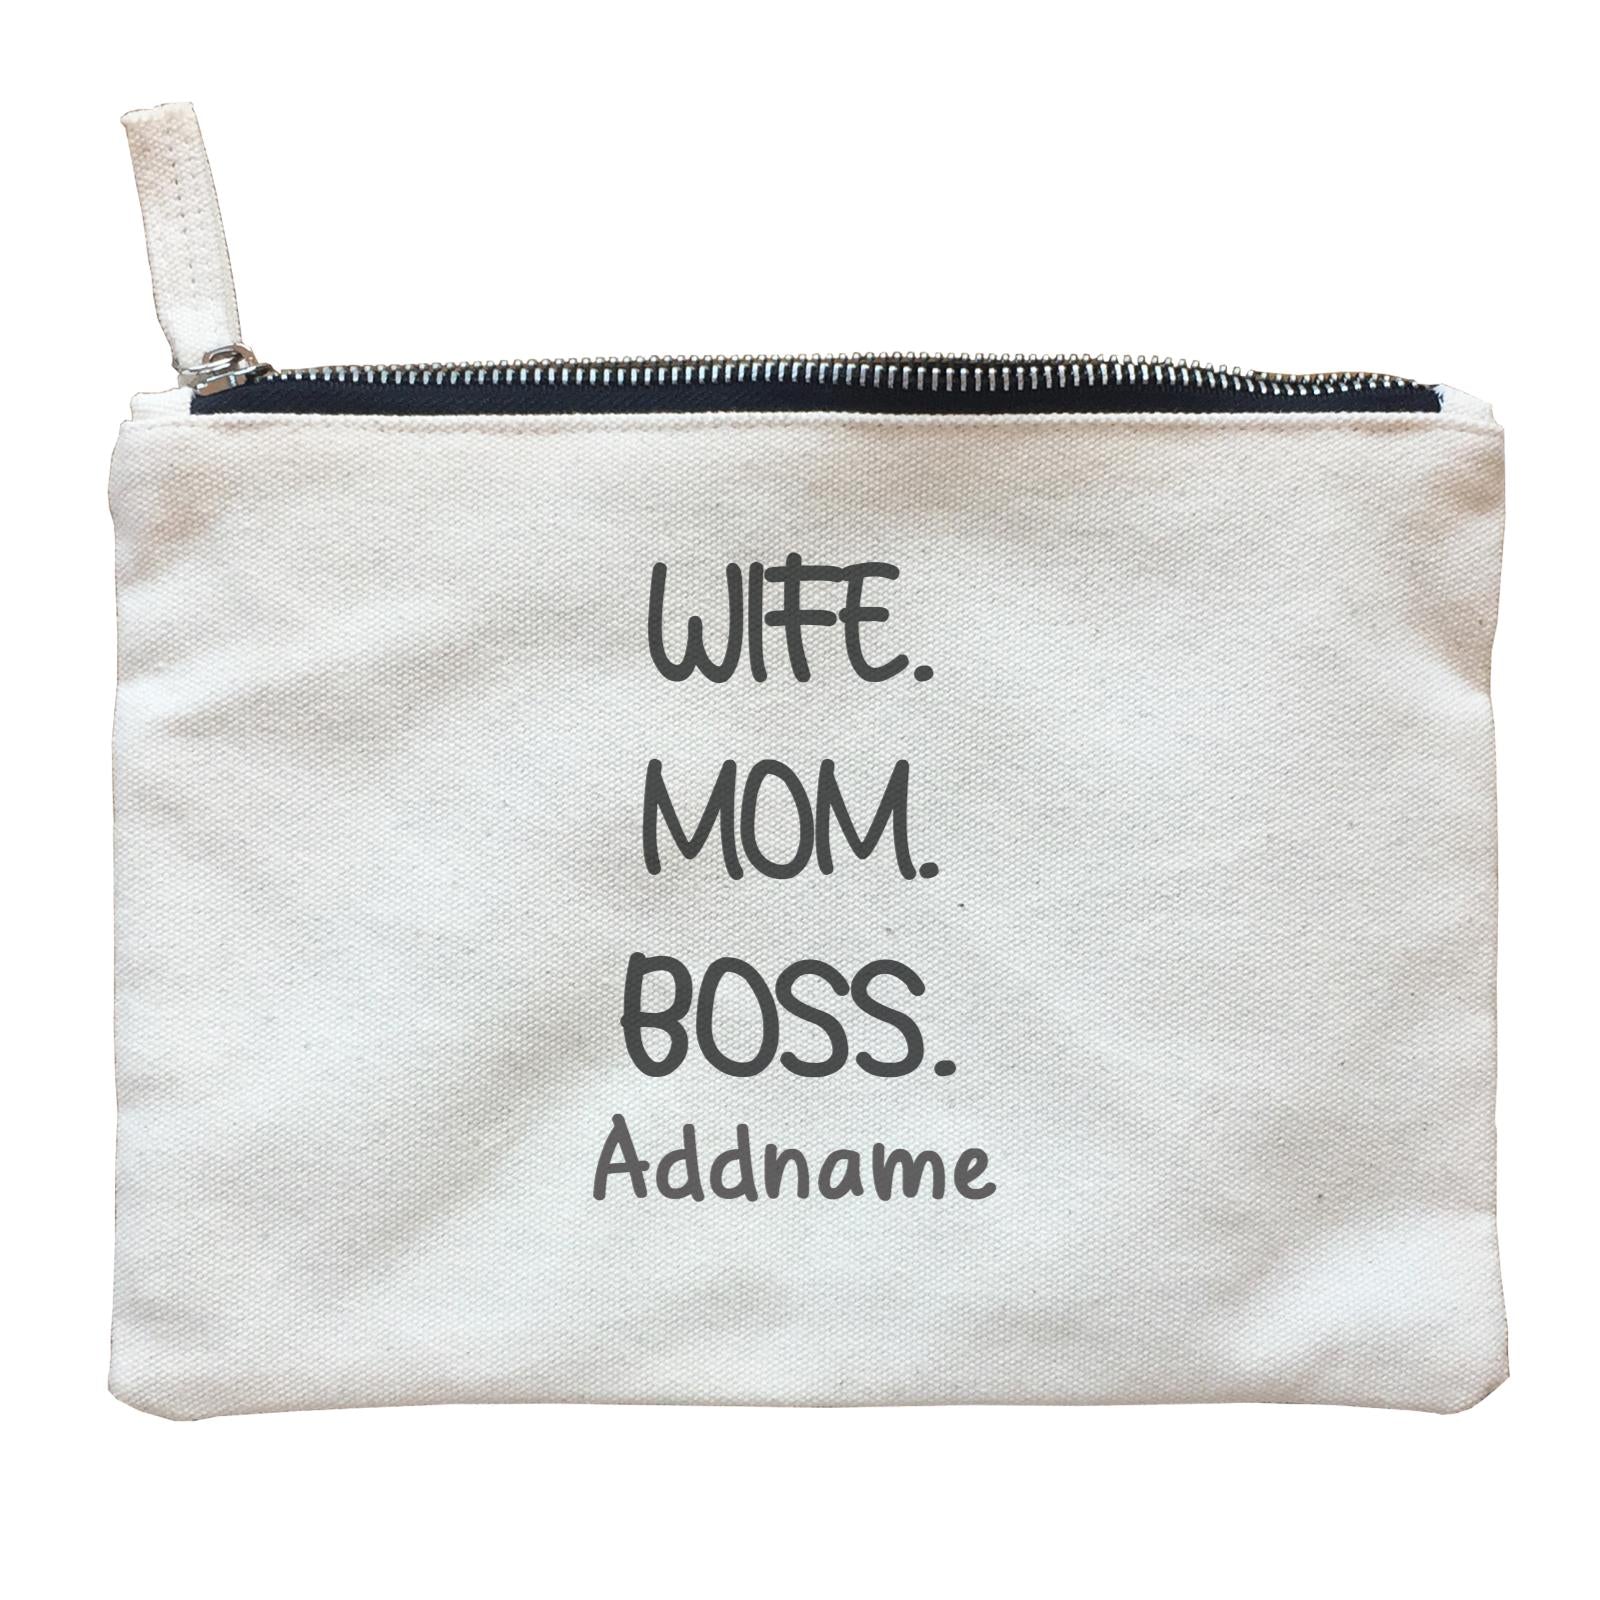 Girl Boss Quotes Cute Typefont Wife Mom Boss Addname Zipper Pouch